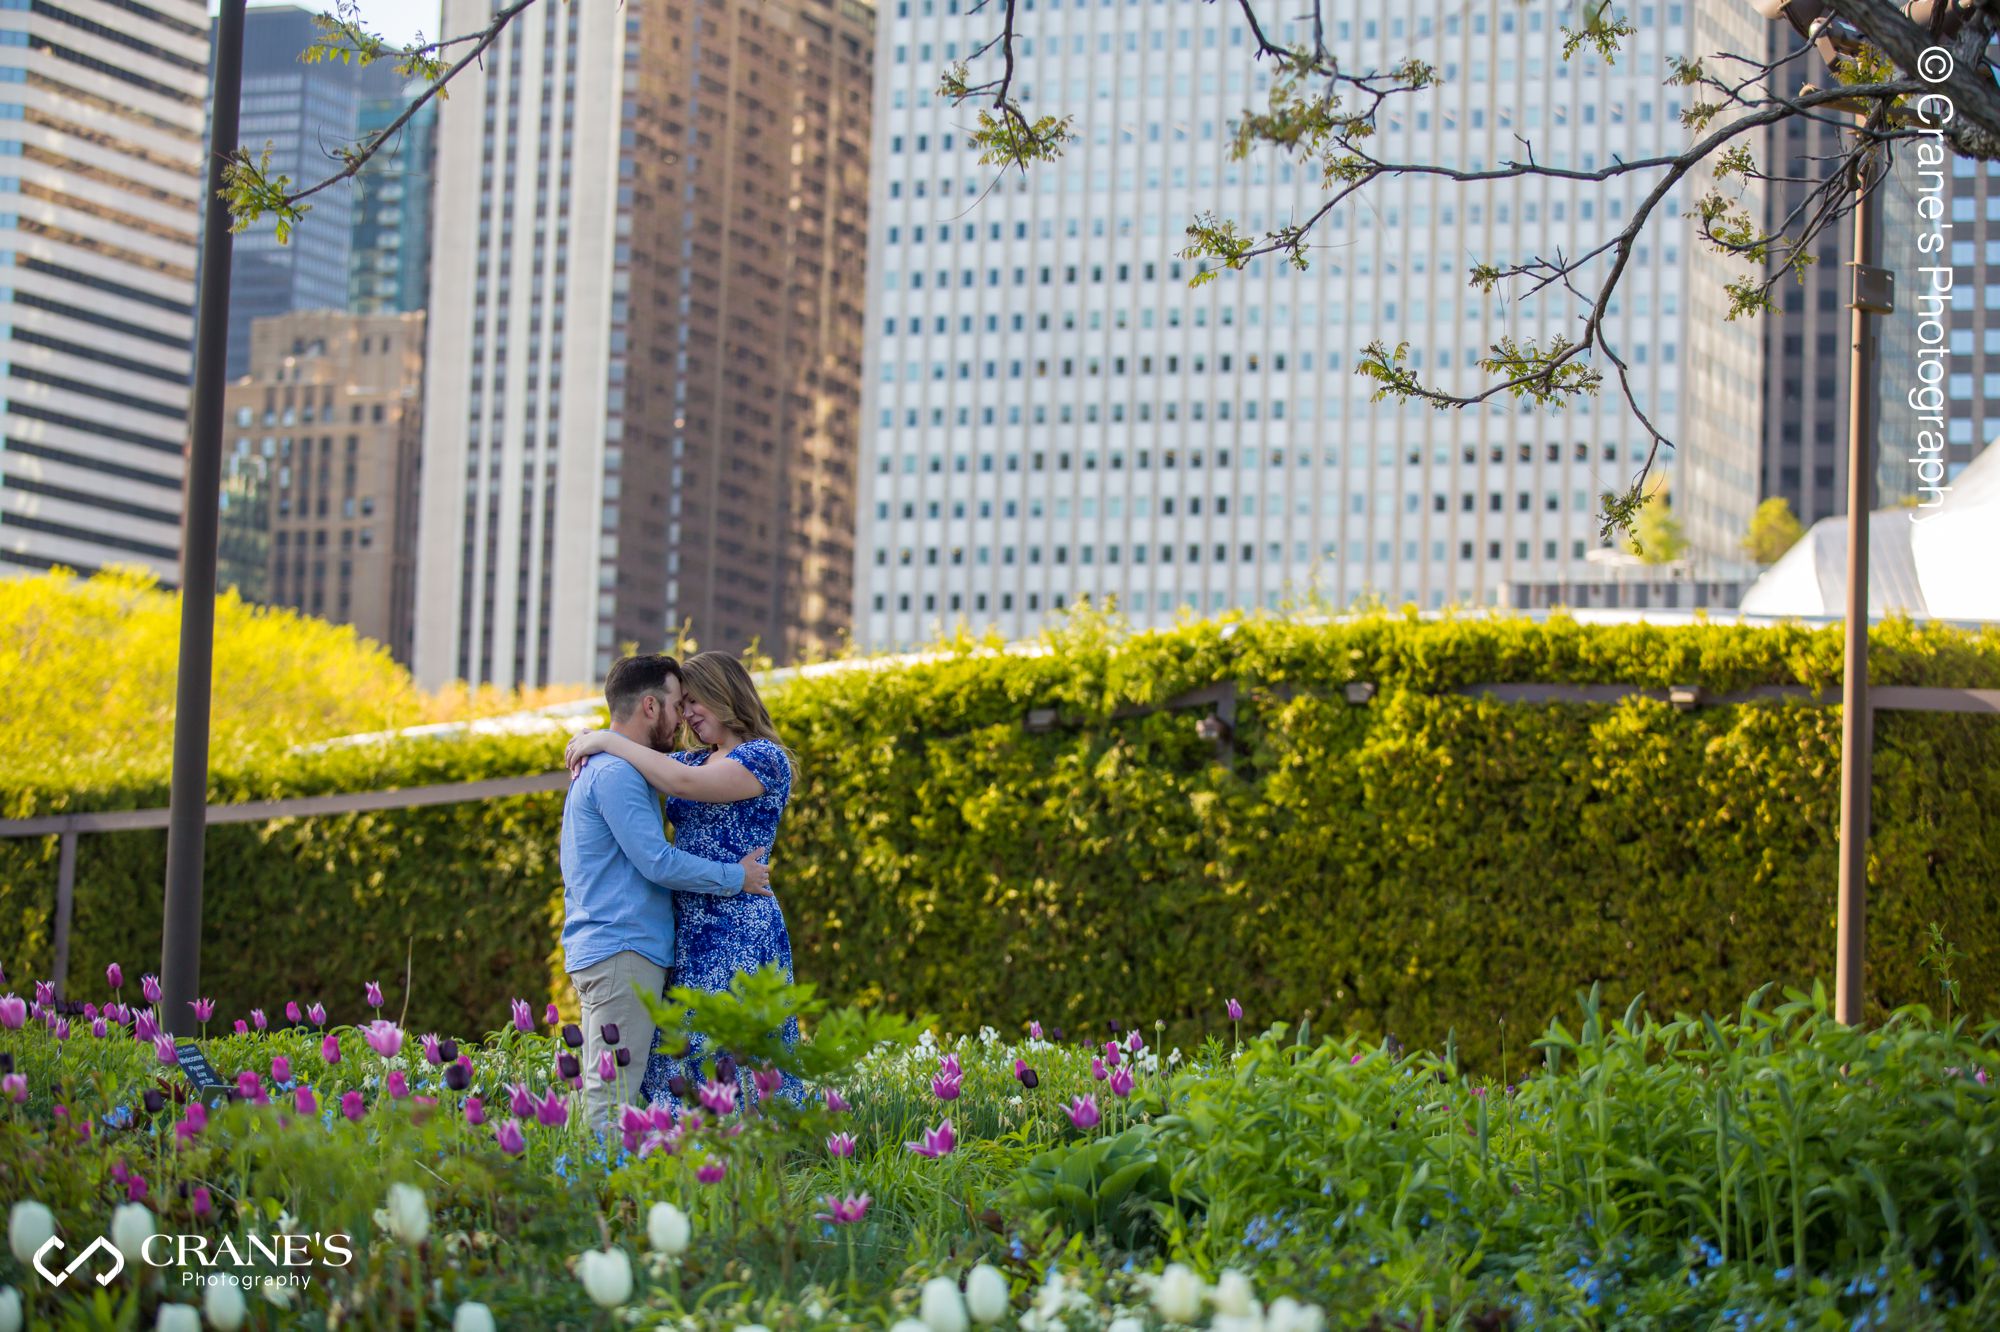 A posed image of a couple surrounded with flowers with the city in the background